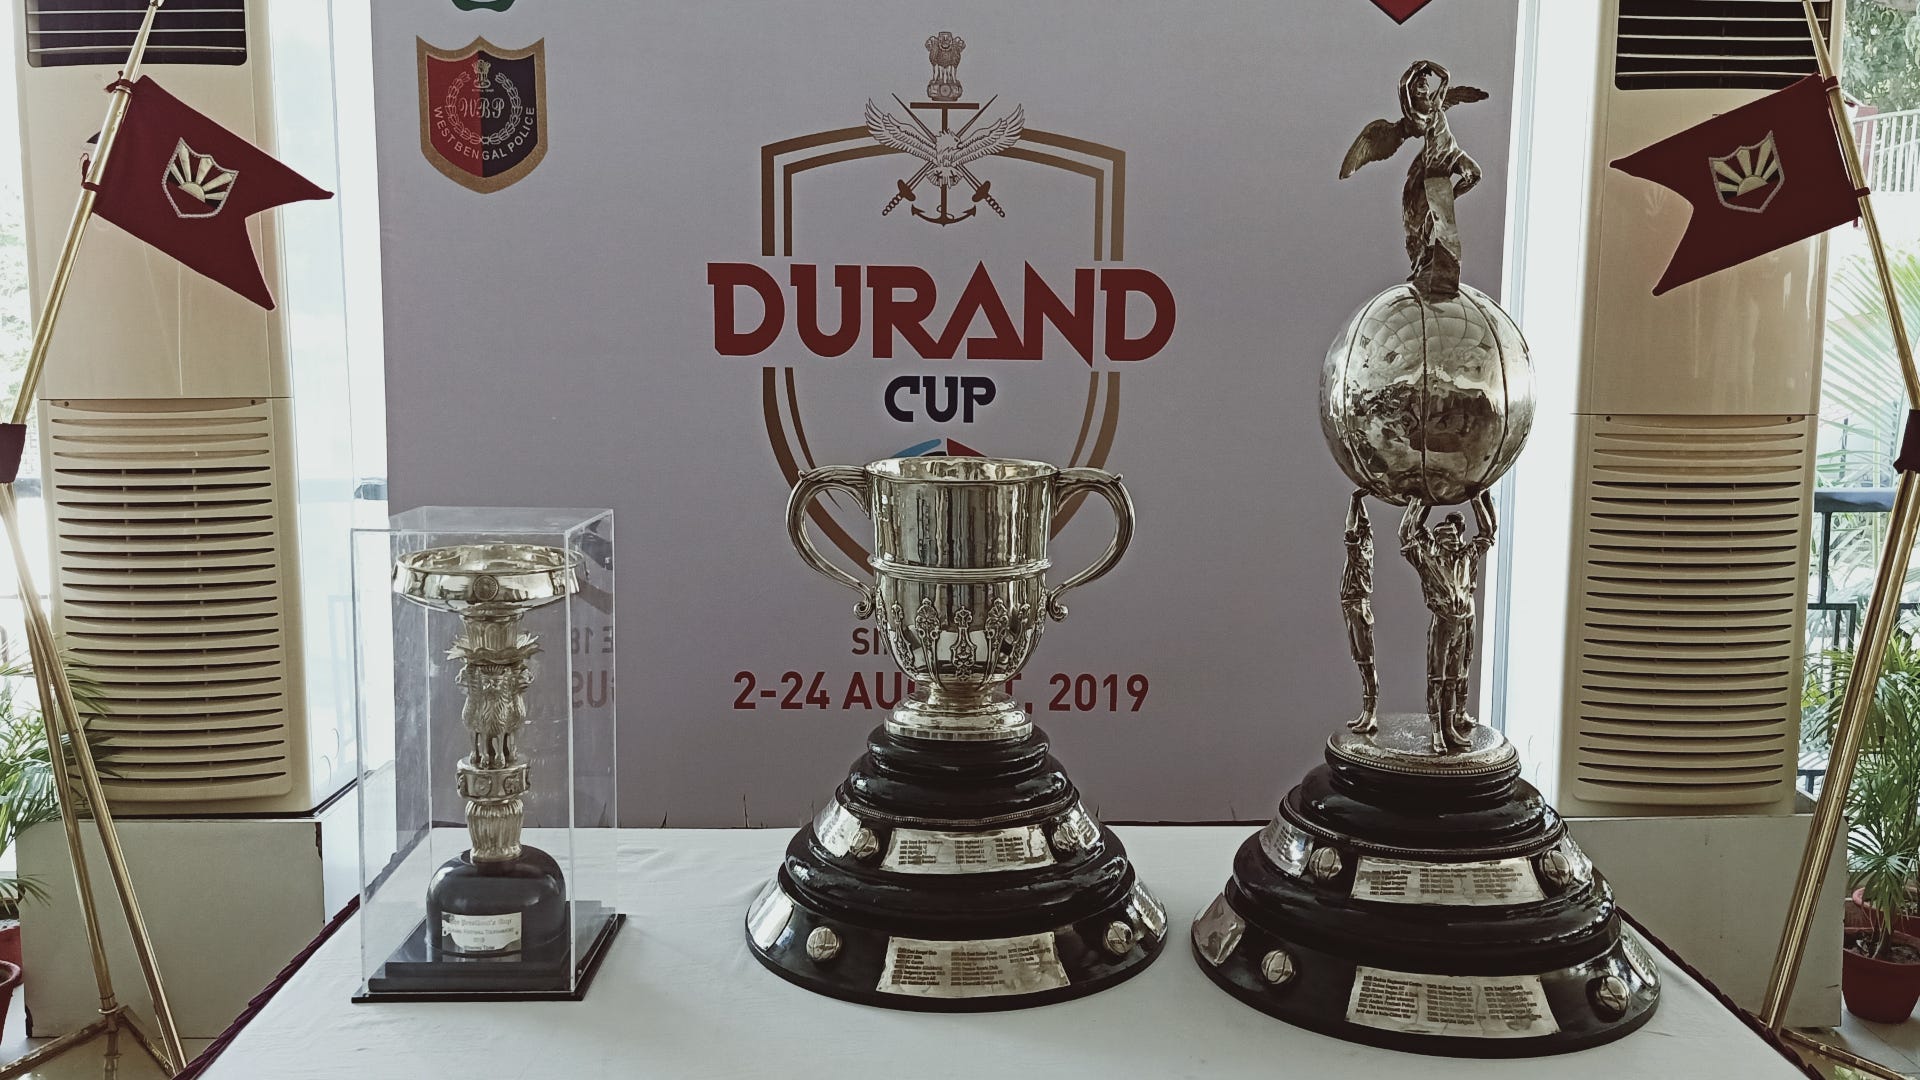 Durand Cup 2022 Groups, fixtures and schedule